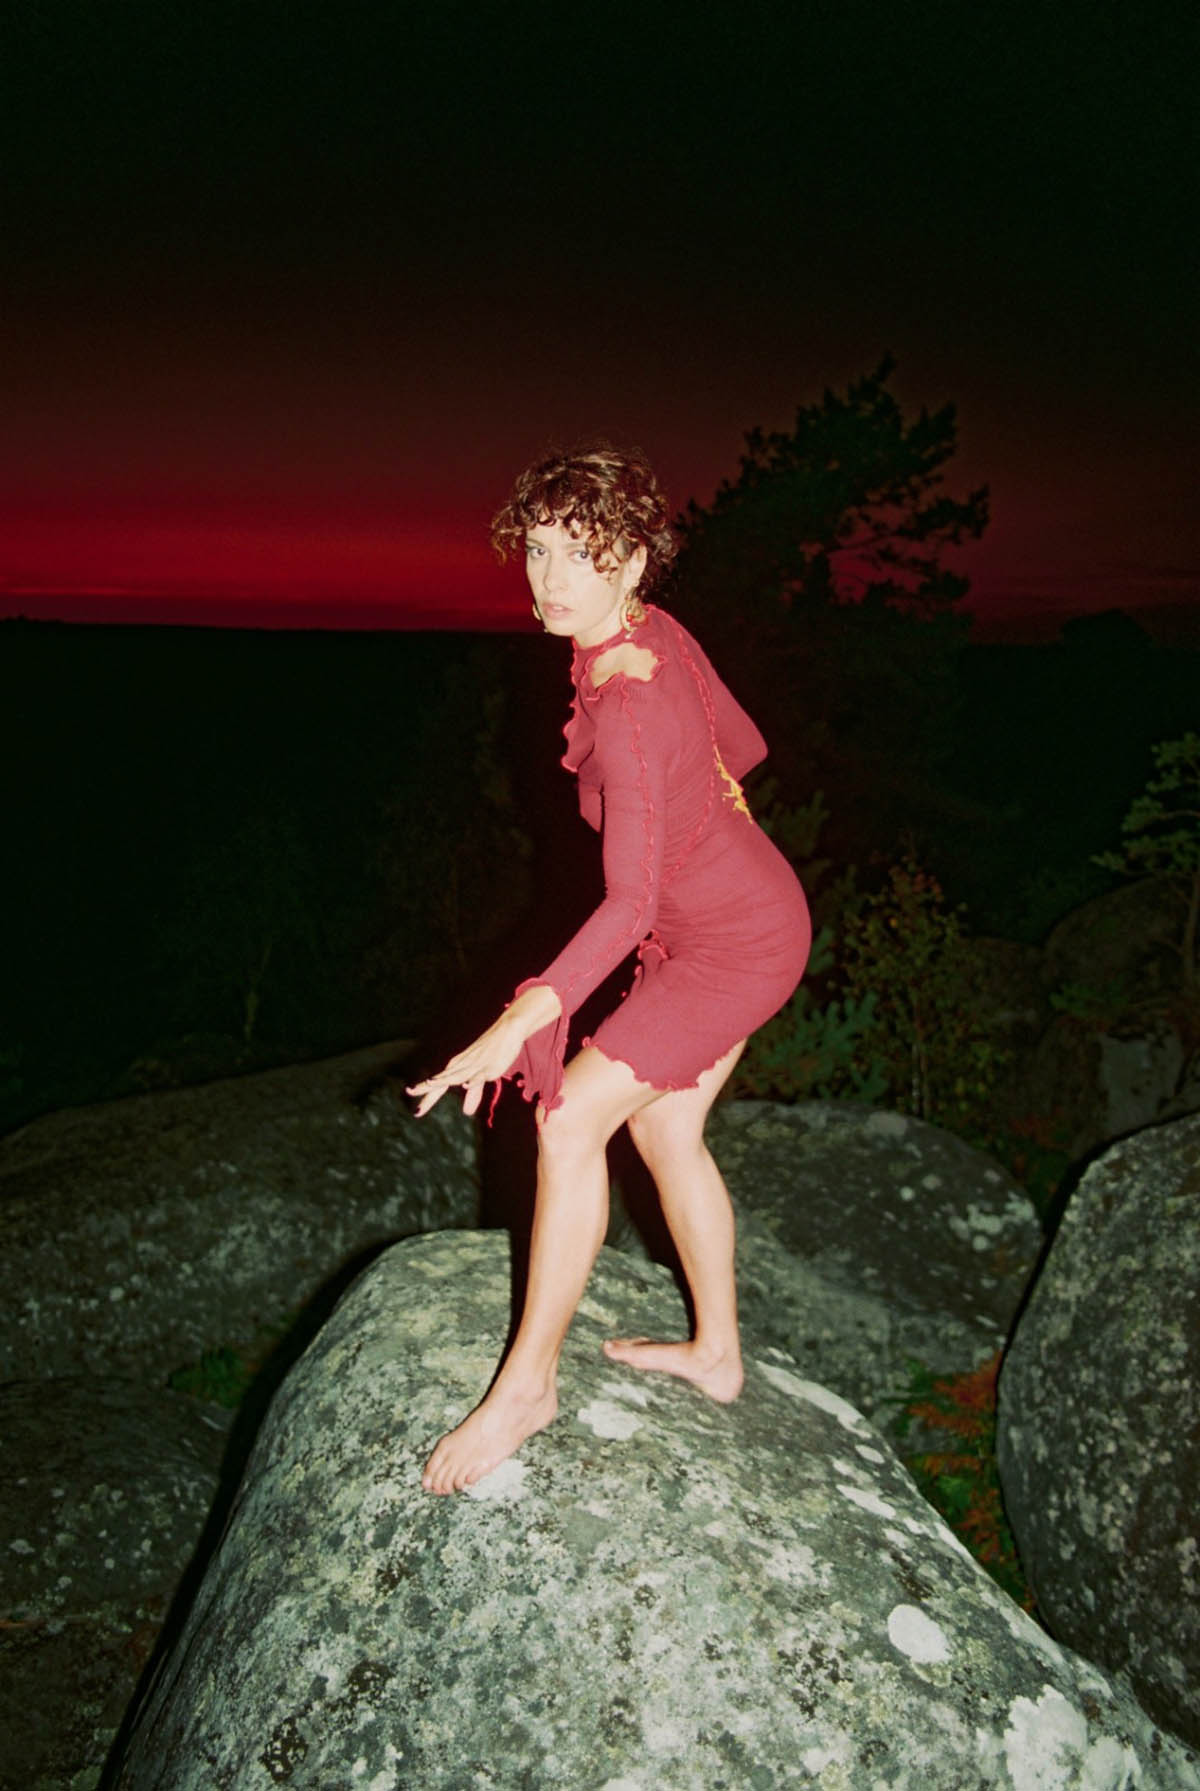 A white woman stands on a grey spotted rock with other bis rocks around her. It is Julie Bessard, alias HSRS. She is wearing a red, tight-fitting dress that reaches just above the knee, with long sleeves. Her legs and feet are bare. She has red, curly, pinned-up hair. She makes a slight lunge forward with her left foot, seemingly balancing herself with her left arm, which she delicately holds forward. The scene takes place at night, on the horizon the sky is dark red, all around is black, only the protagonist is illuminated by the flash of the camera.